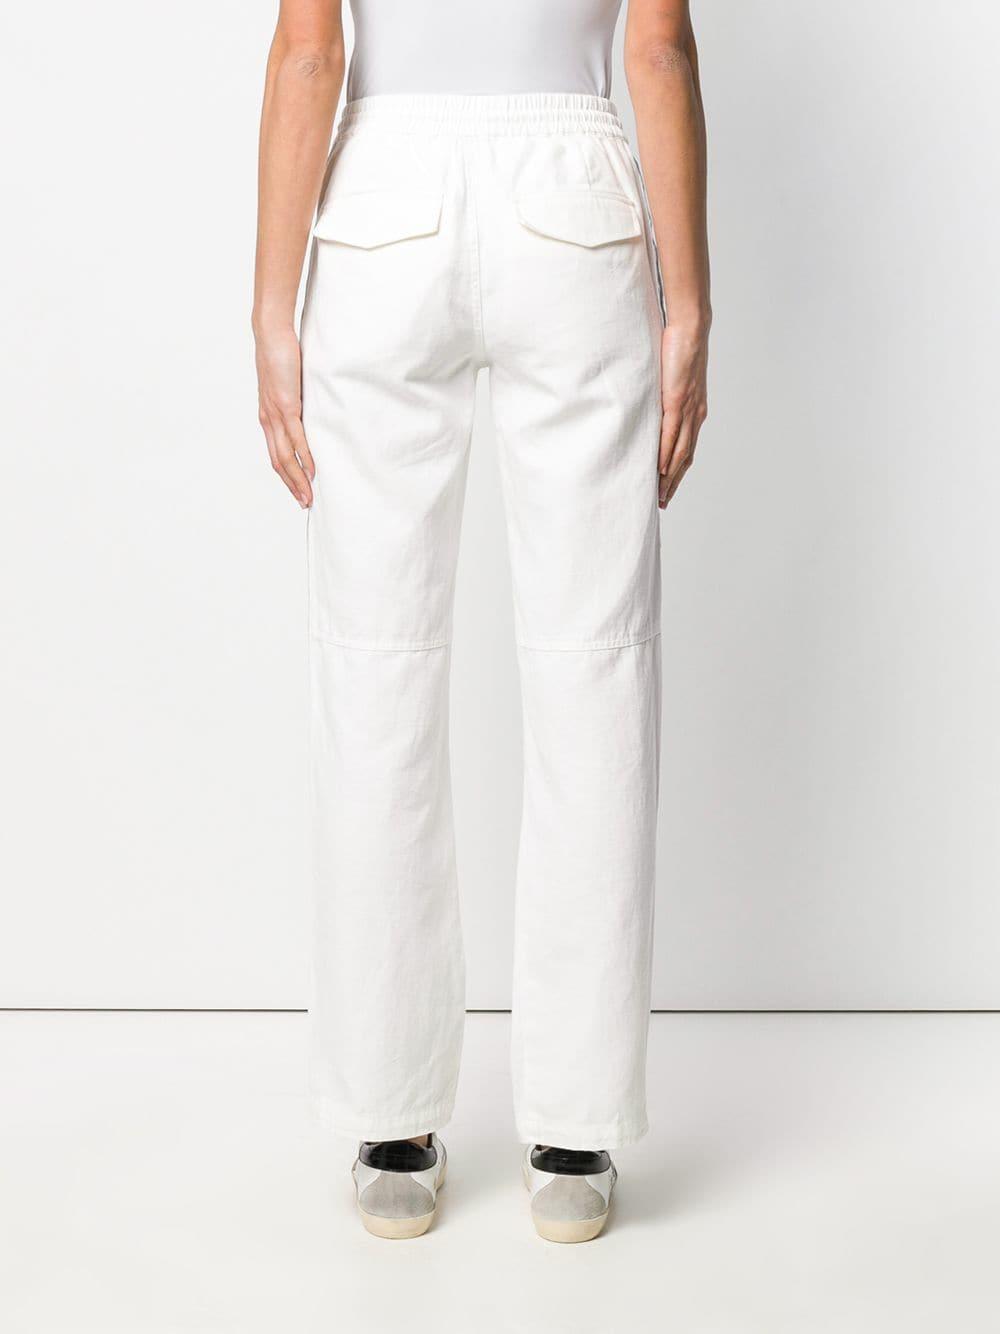 Zadig & Voltaire Cotton Parco Pants in White - Lyst